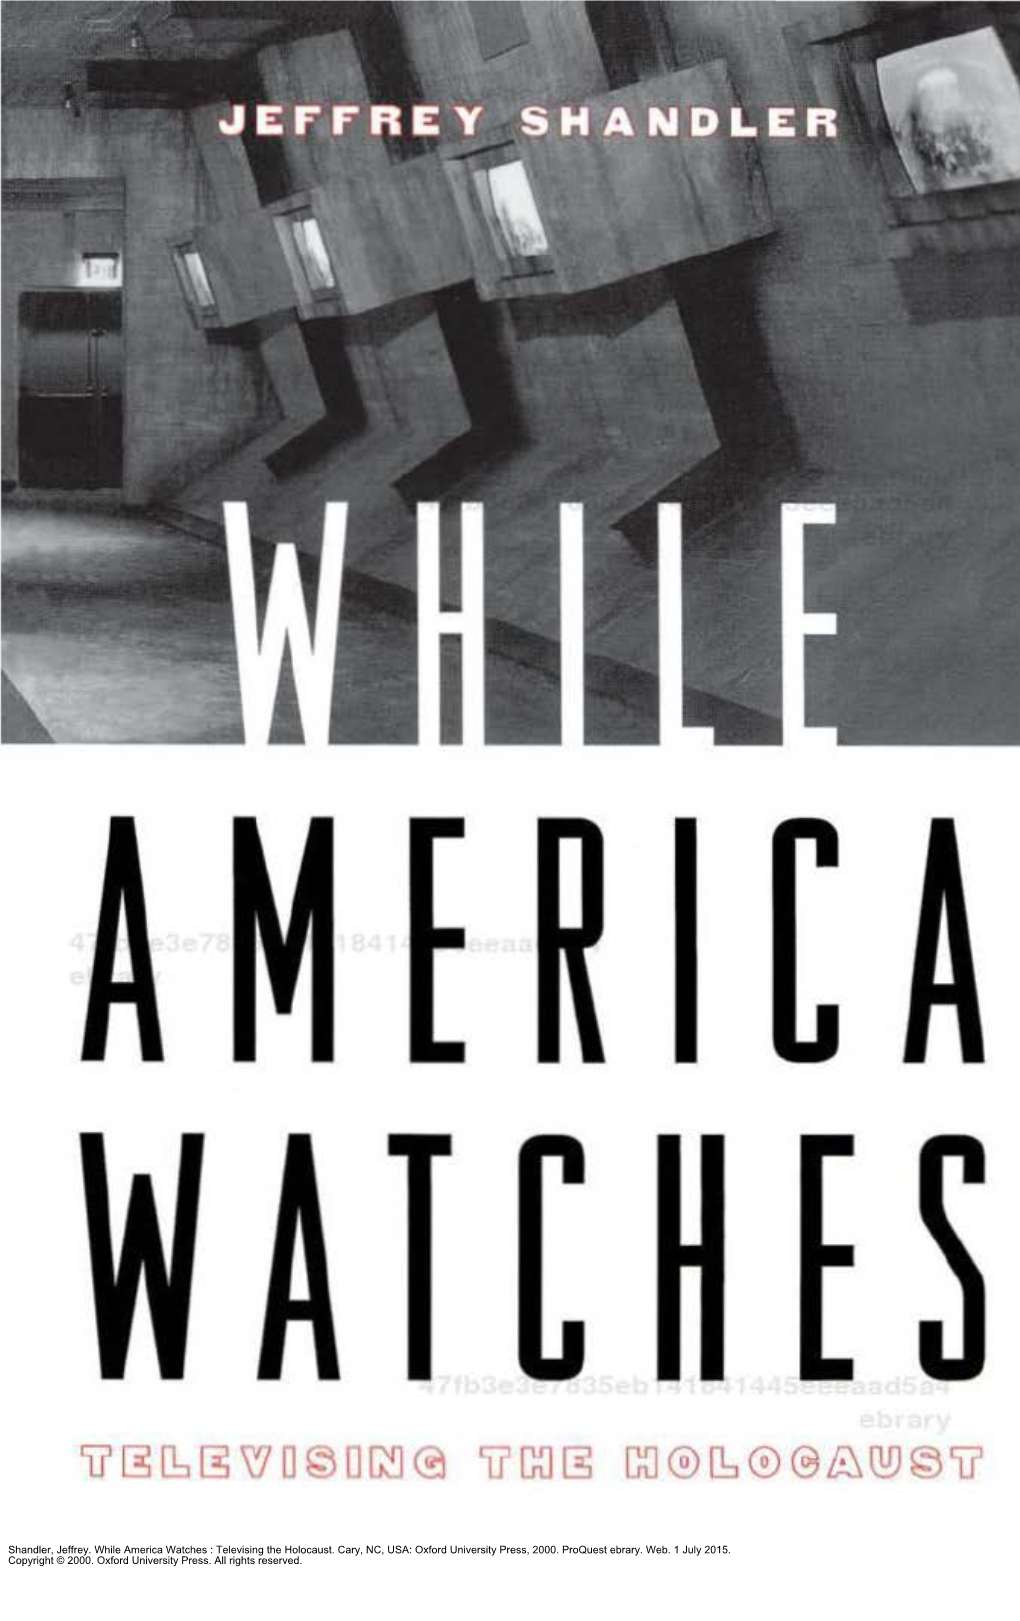 Shandler, Jeffrey. While America Watches : Televising the Holocaust